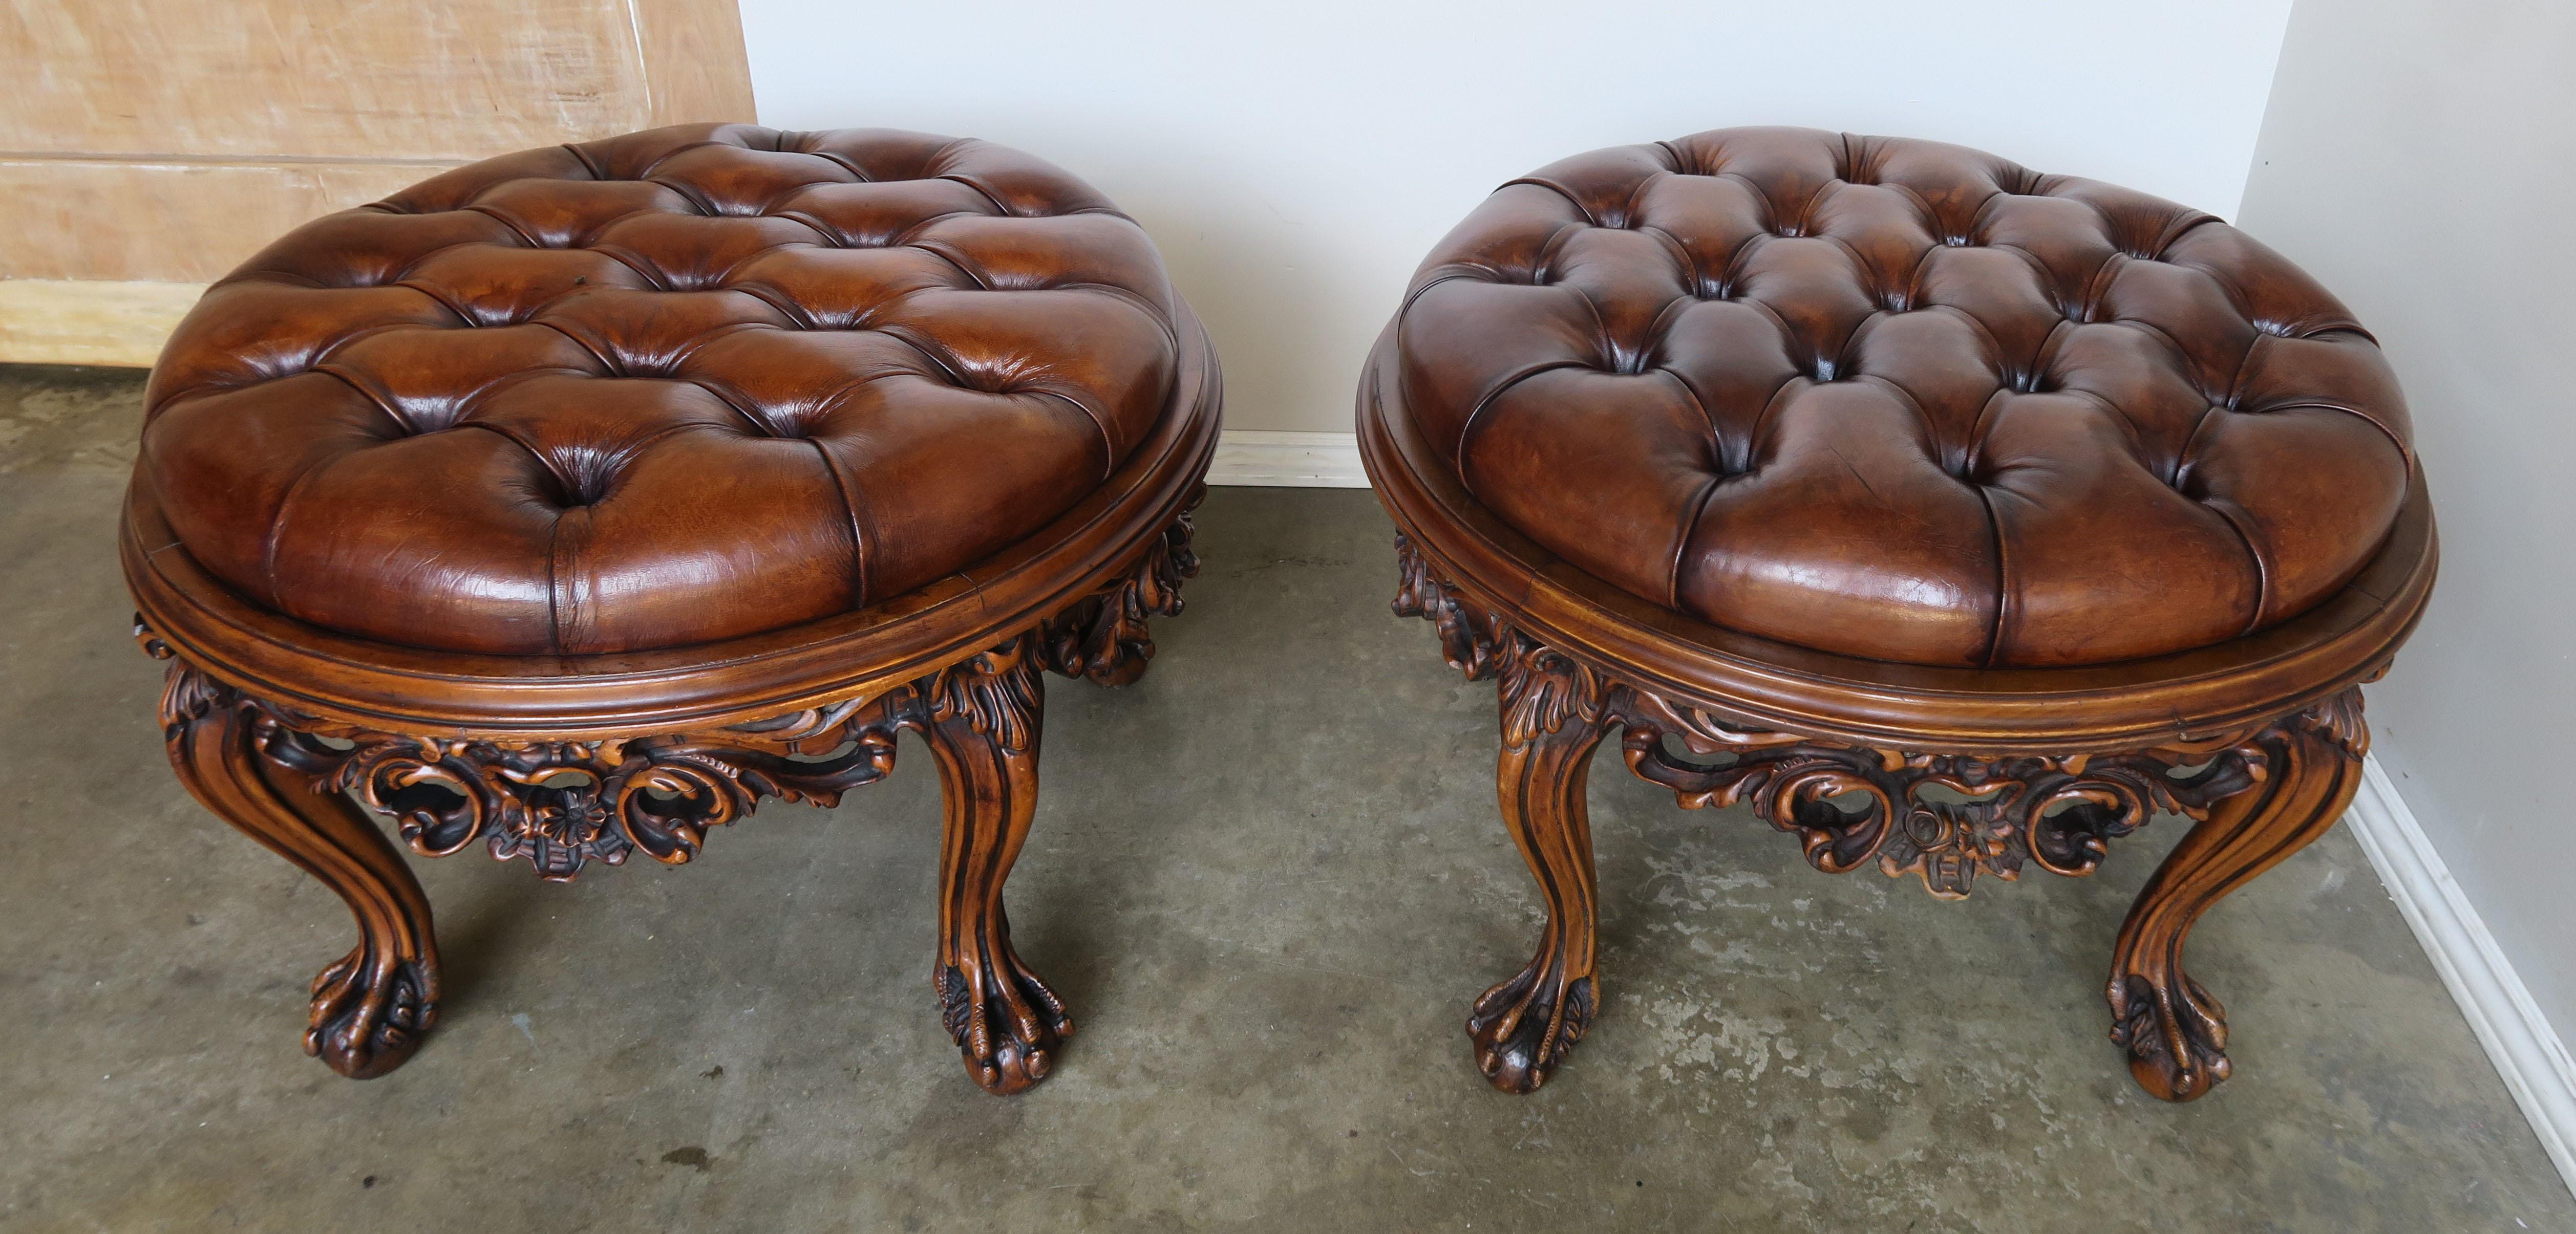 A matched pair of 1930s ornately carved French Louis XV style walnut ottomans standing on four cabriole legs that end in ball and claw feet. The round shaped pieces are upholstered in tufted leather with a beautiful distressed finish.